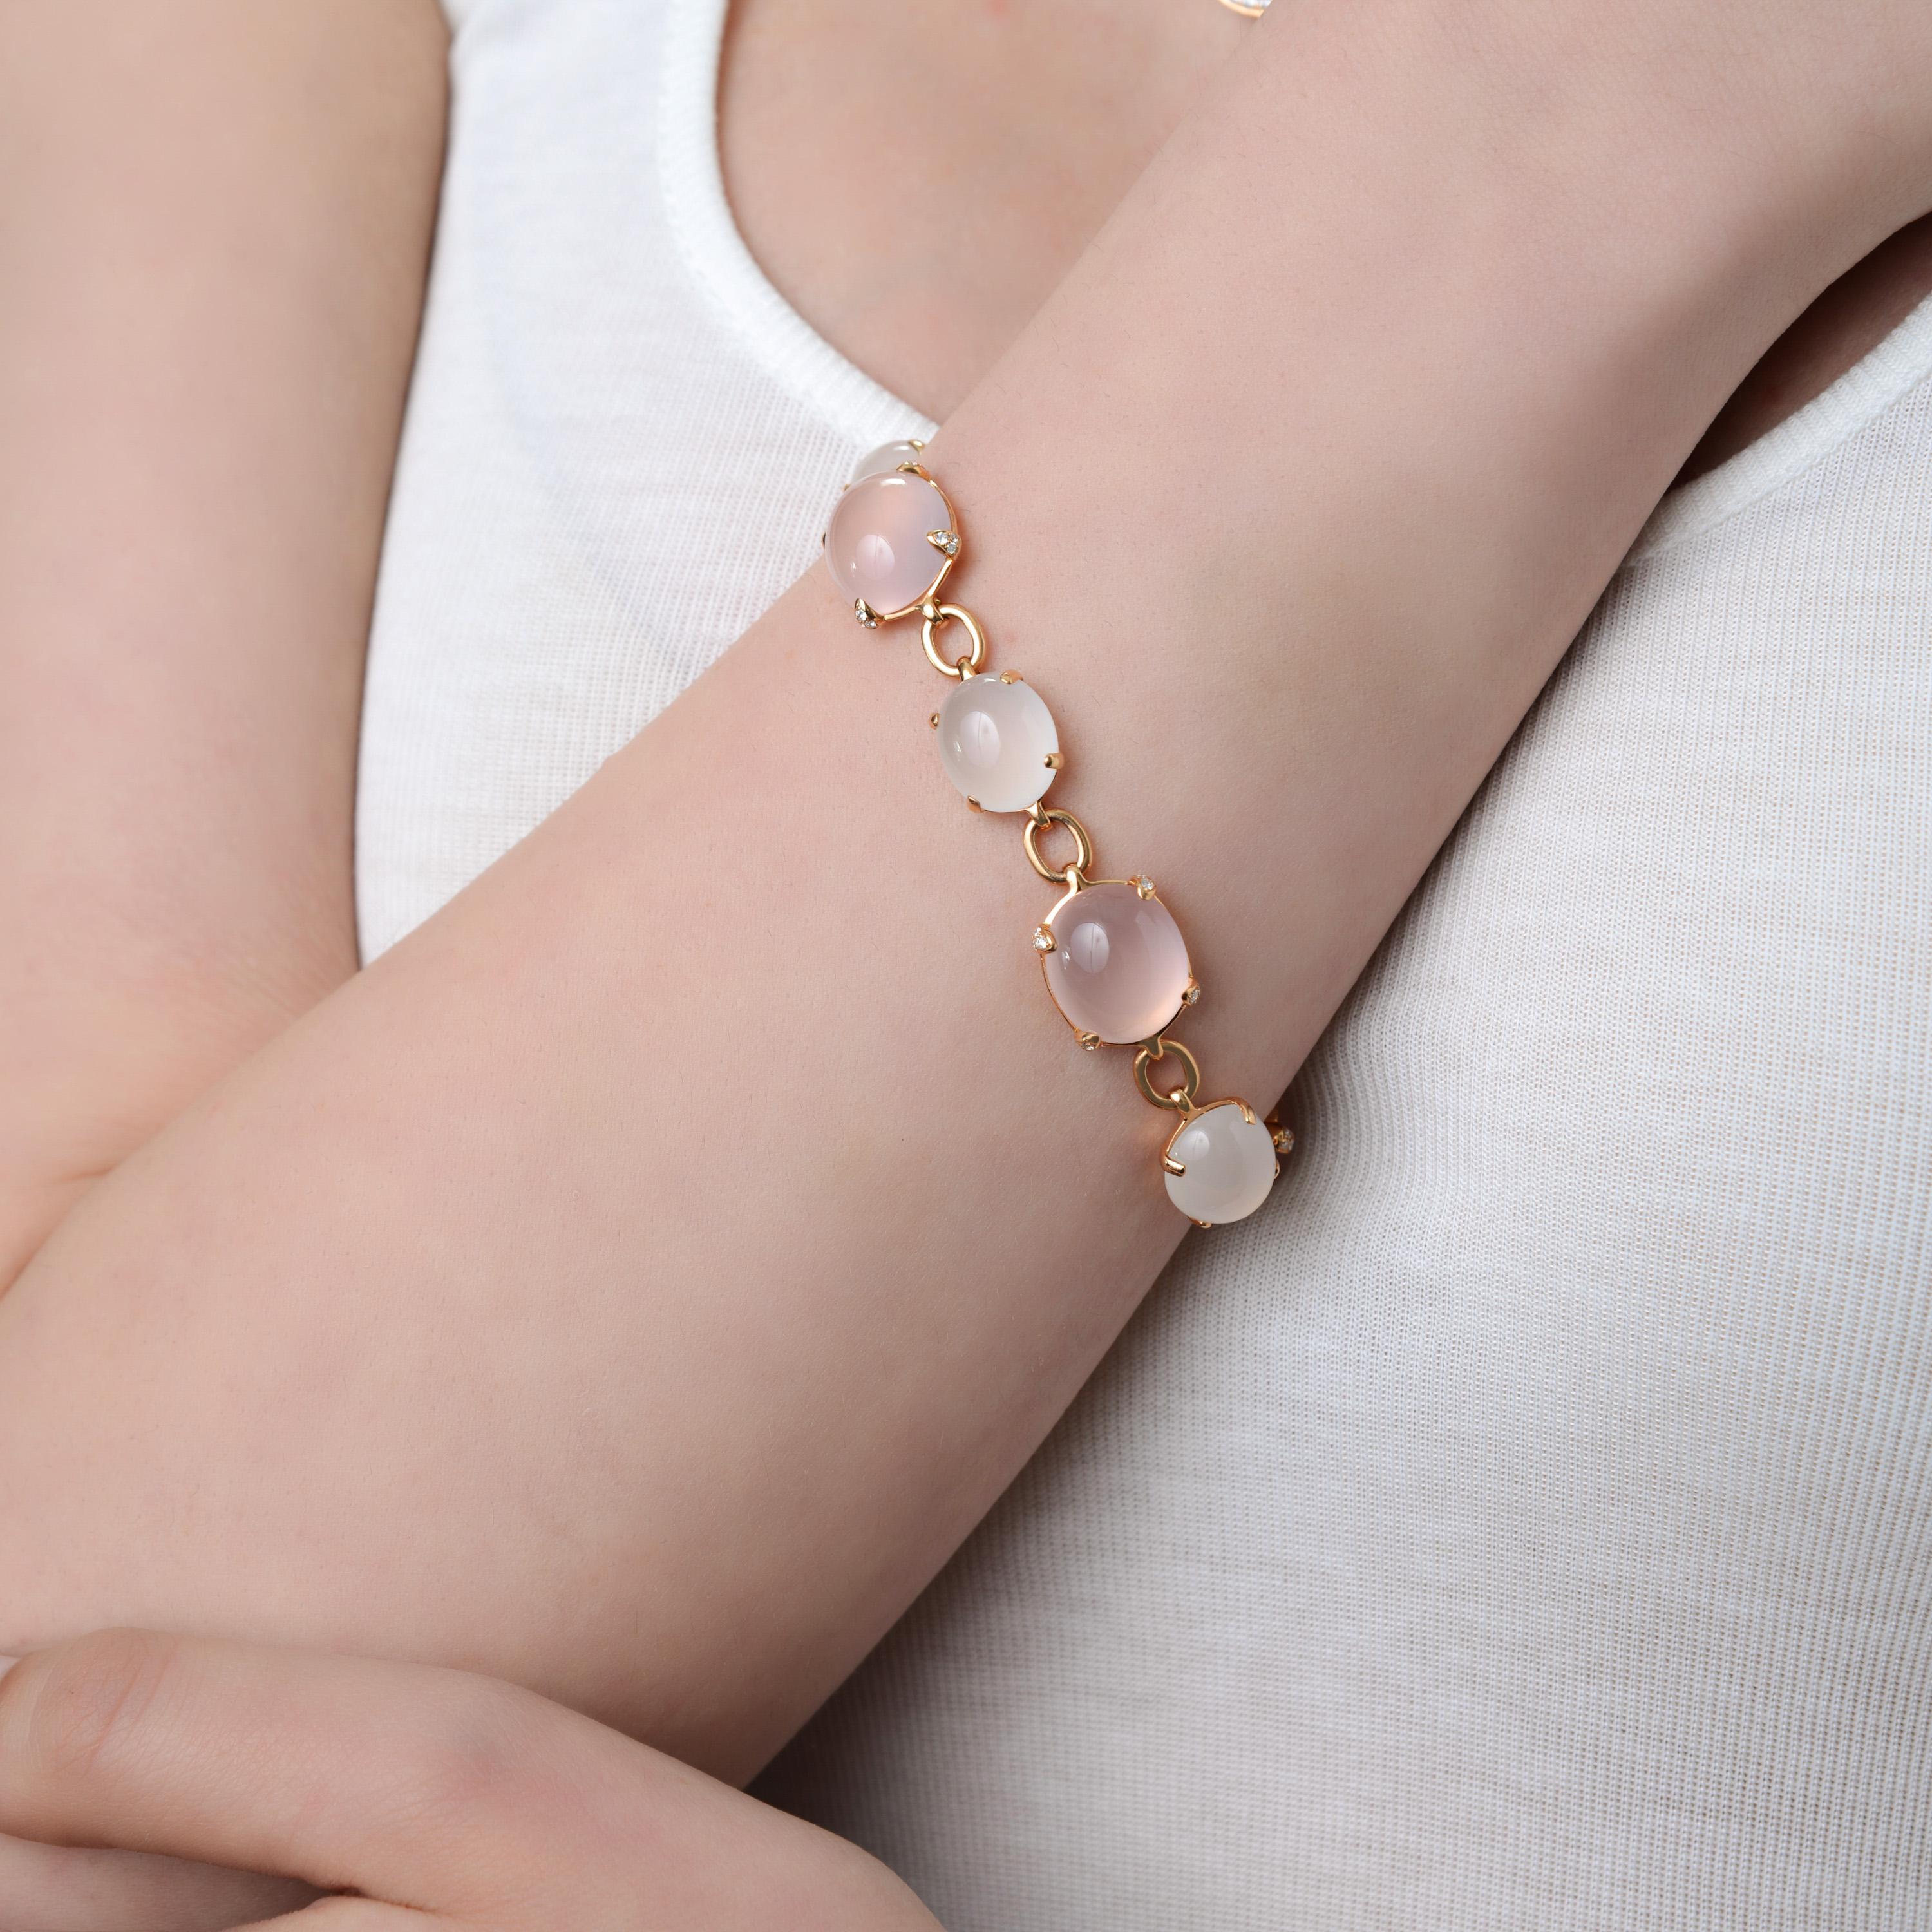 Bucherer 18k rose gold link bracelet features 0.29ct. tw. brilliant cut diamonds with 28.54ct. tw. white quartz and 38.95ct. tw. rose quartz. the bracelet thickness is 9mm. the length is 7